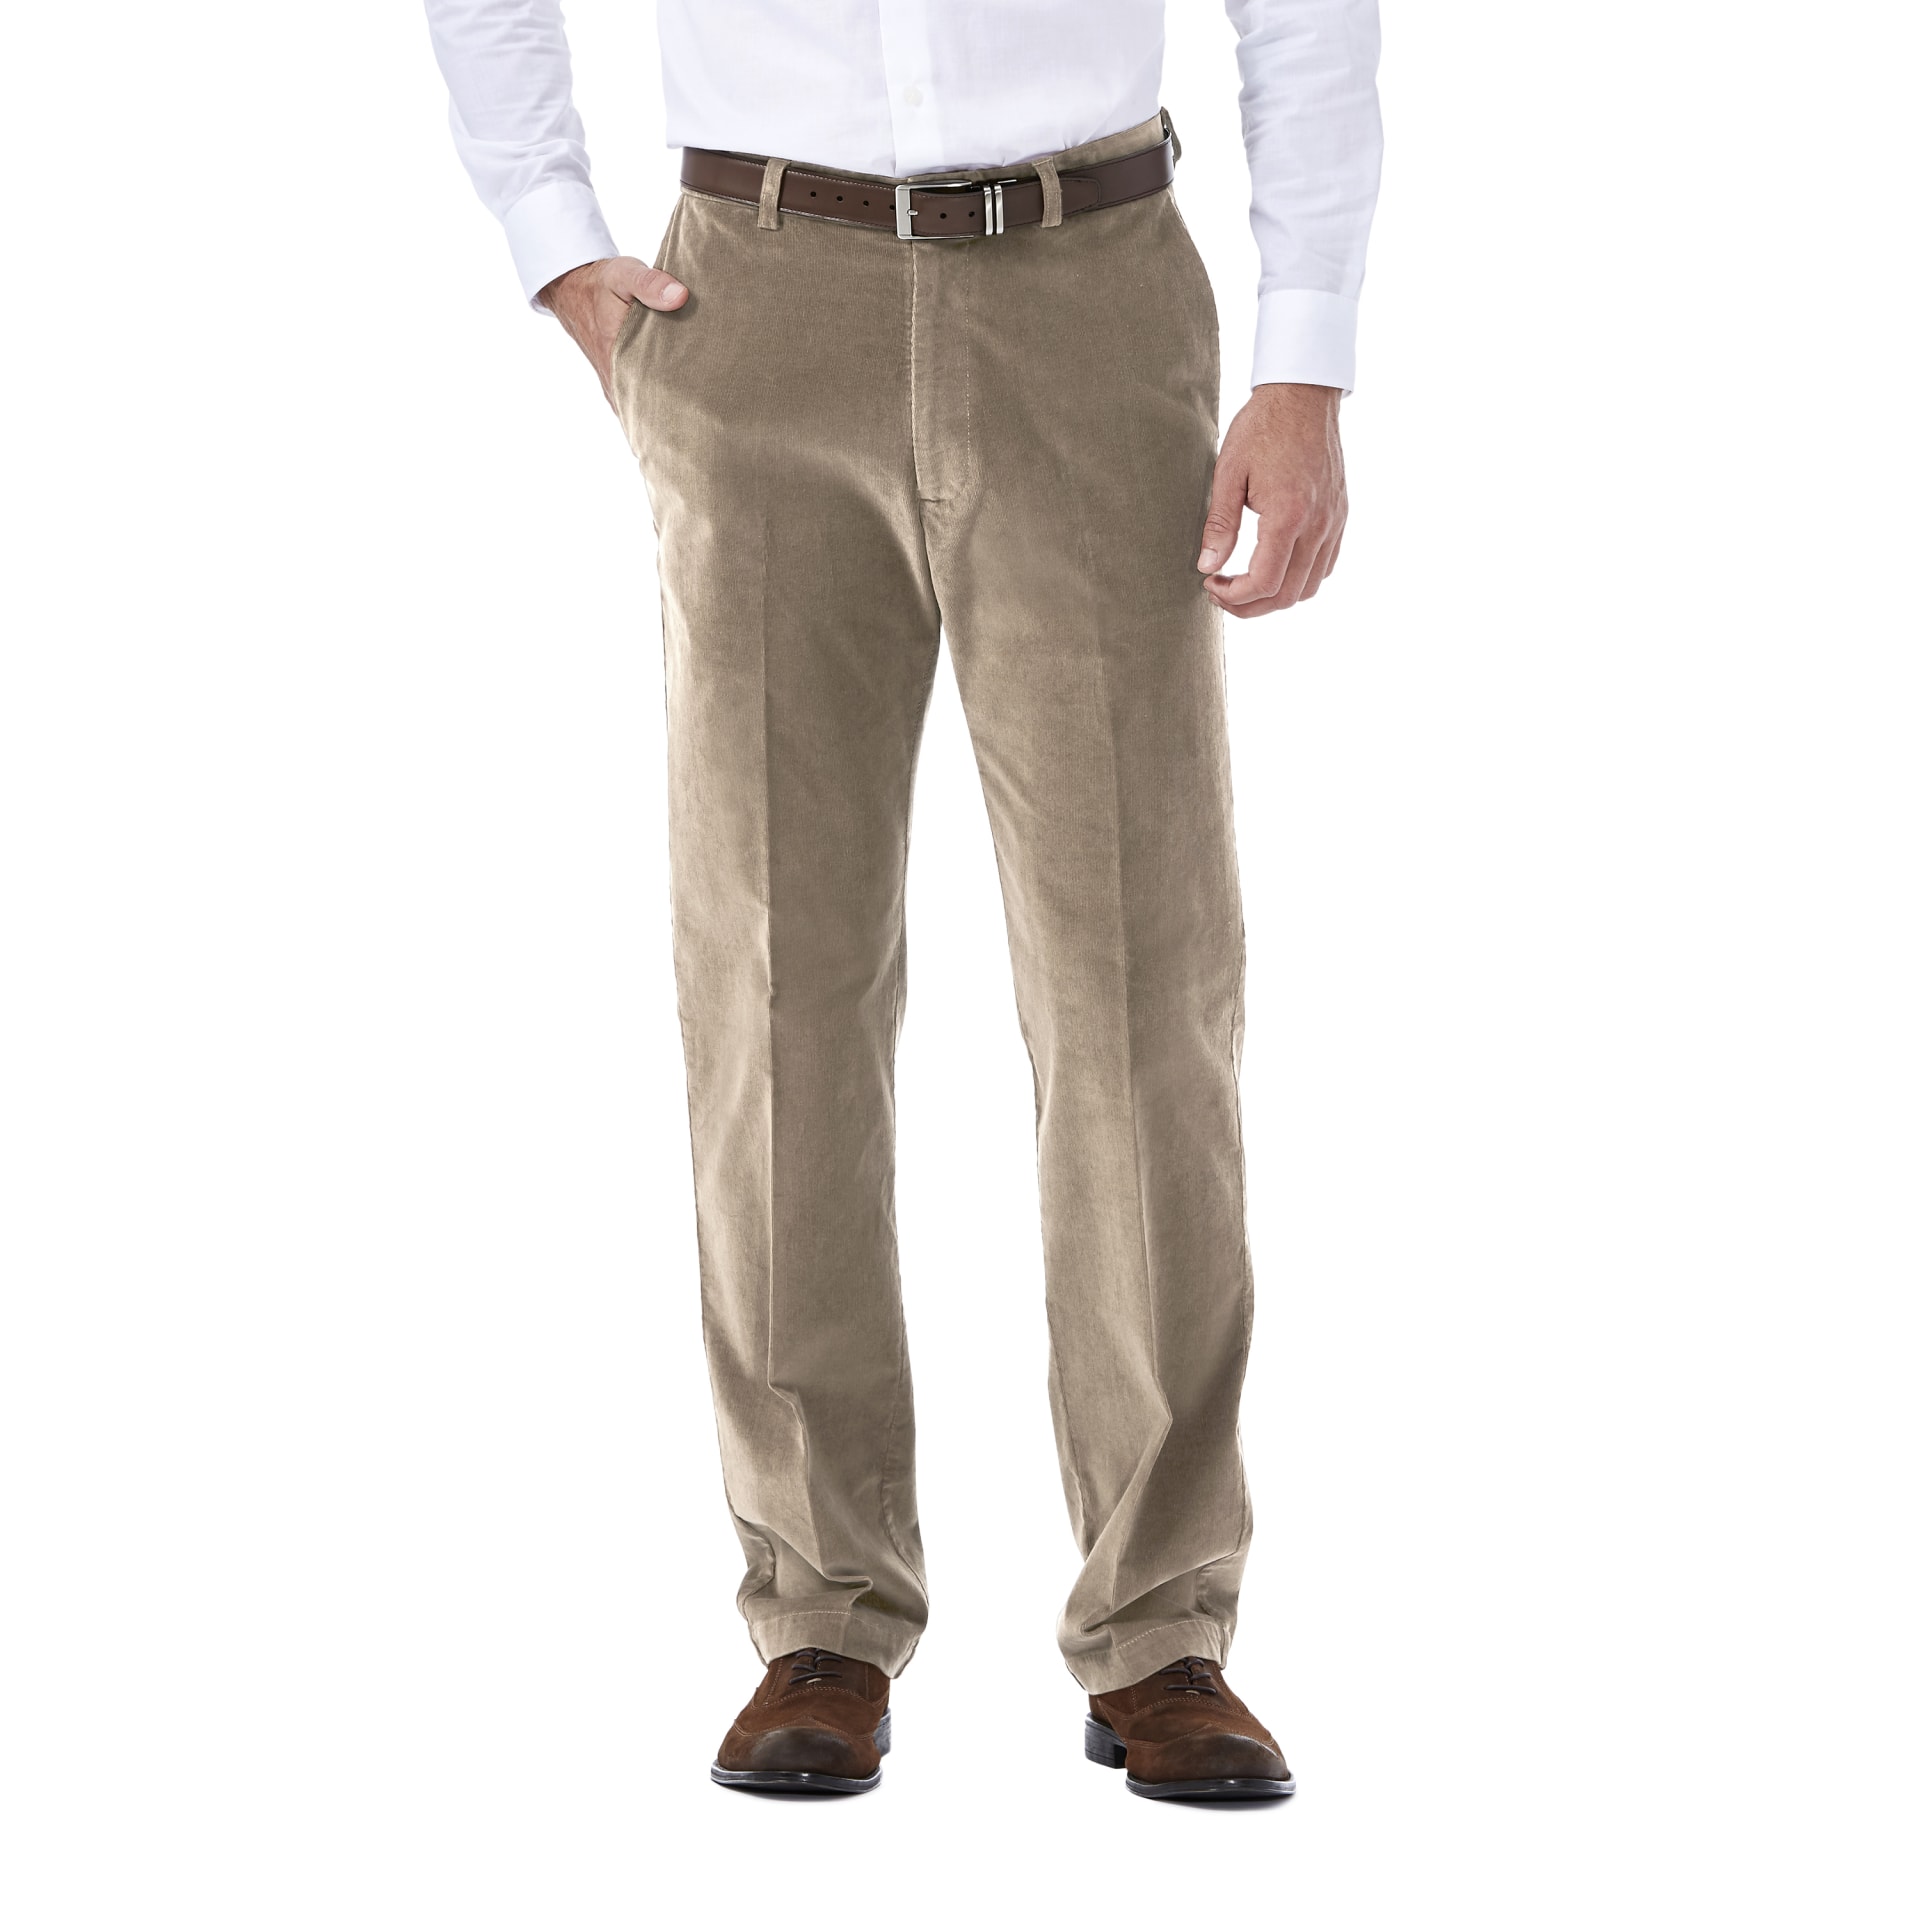 Gala - C2 - Stretch Corduroy Pant - plain front - Available in 7